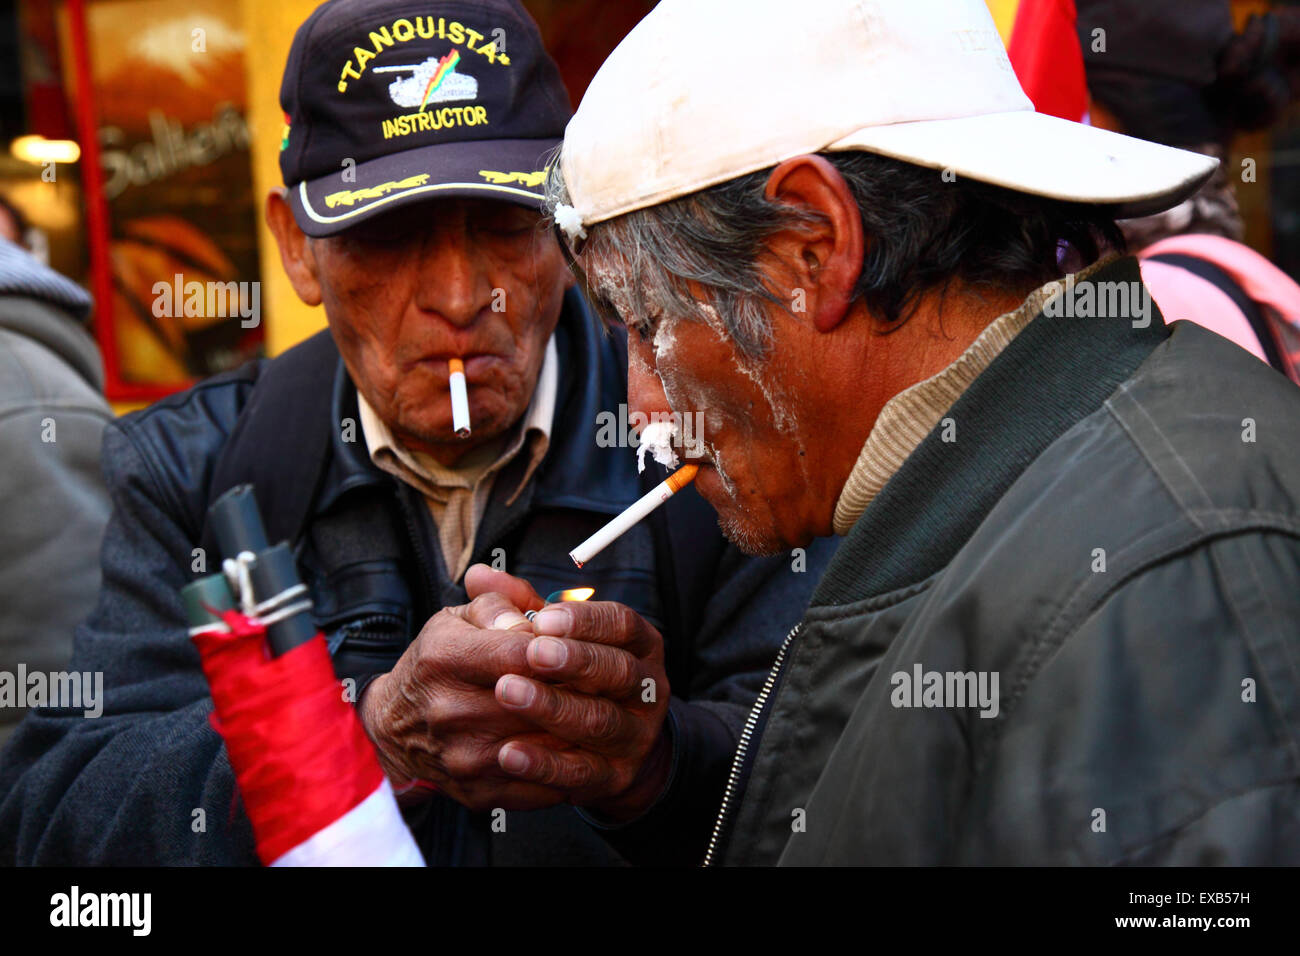 La Paz, Bolivia, 10th July 2015. Protesters from Potosi smoke cigarettes and use tissue paper in their nostrils to combat the effects of tear gas during a protest by the Potosi Civic Committee and supporters. They are in La Paz to demand the government keeps promises made to the region in the past, which include the construction of a cement factory, hospitals, a hydroelectric plant and an international airport. Police used tear gas to prevent the protesters entering Plaza Murillo Credit:  James Brunker / Alamy Live News Stock Photo